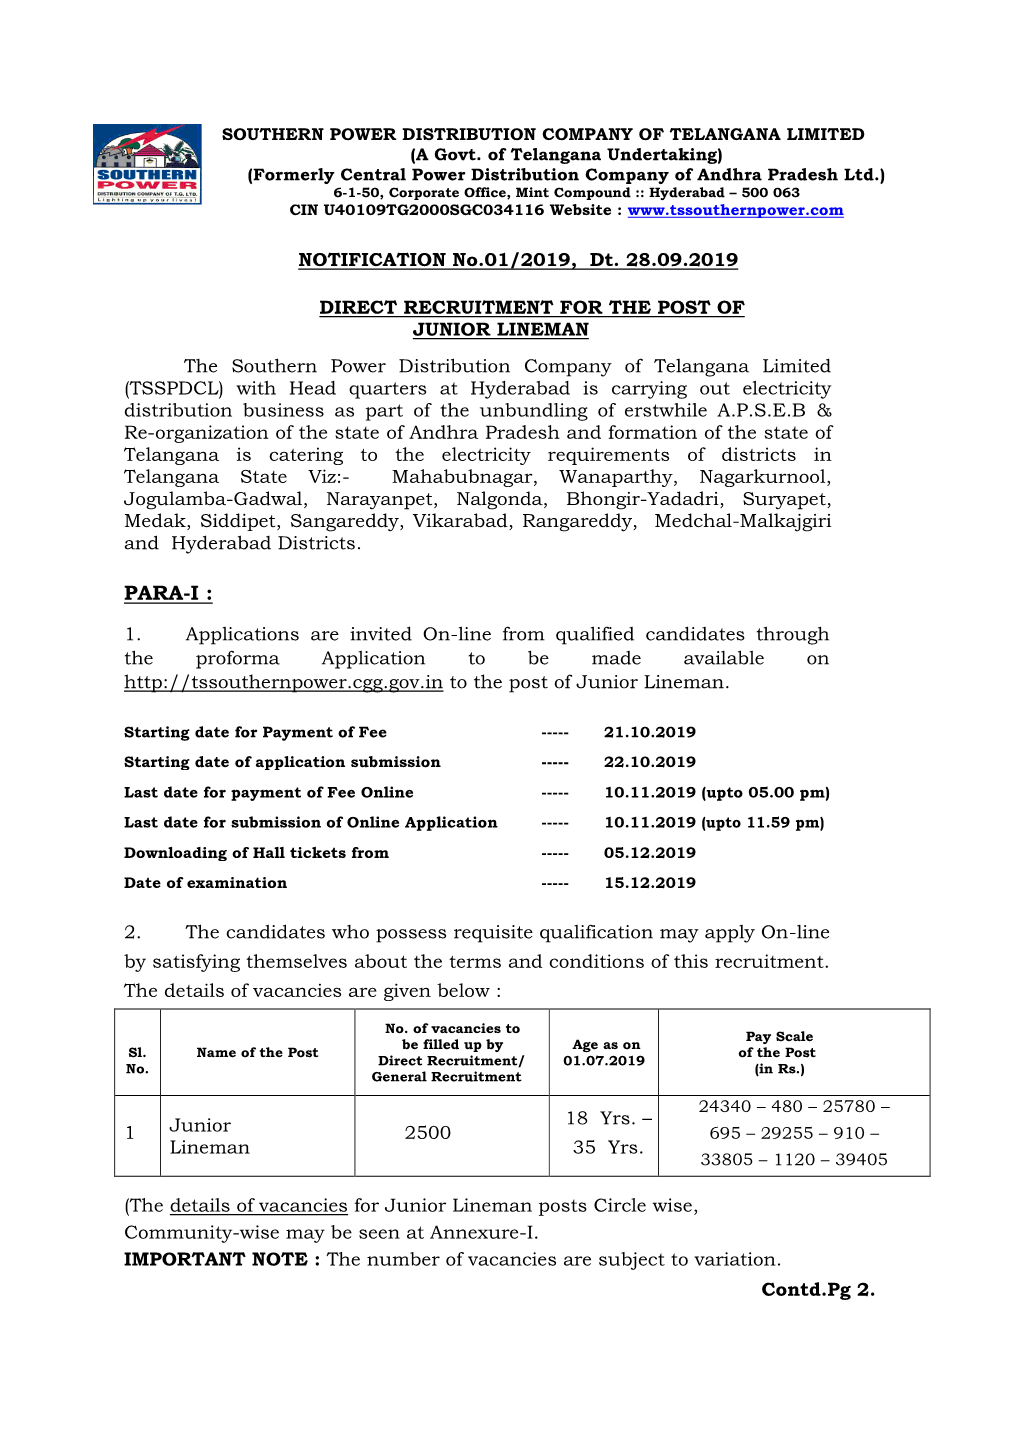 Detailed Notification for the Post of Junior Lineman